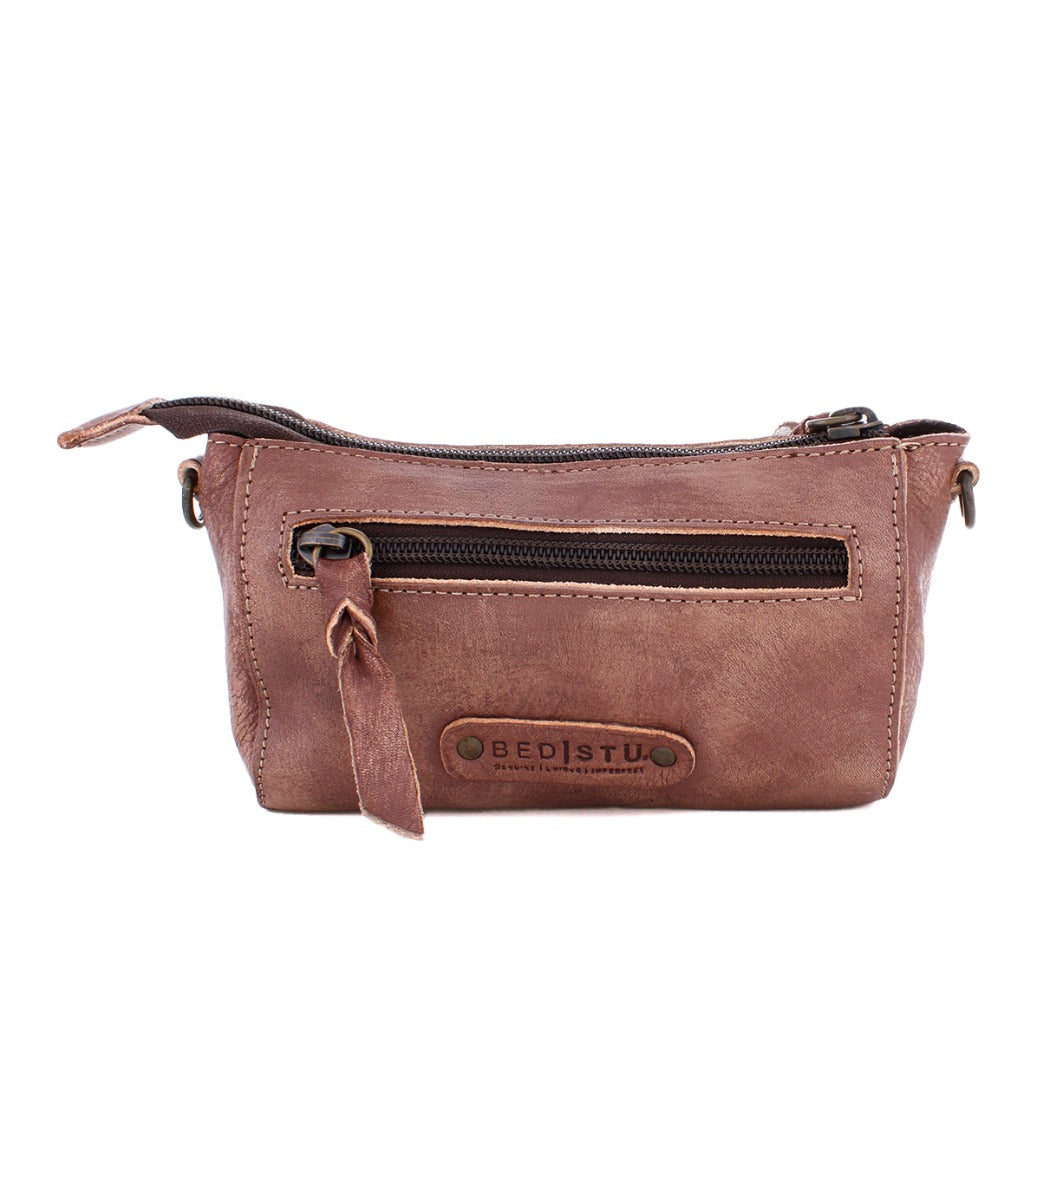 A brown leather Encase pouch with a zipper, from the brand Bed Stu.